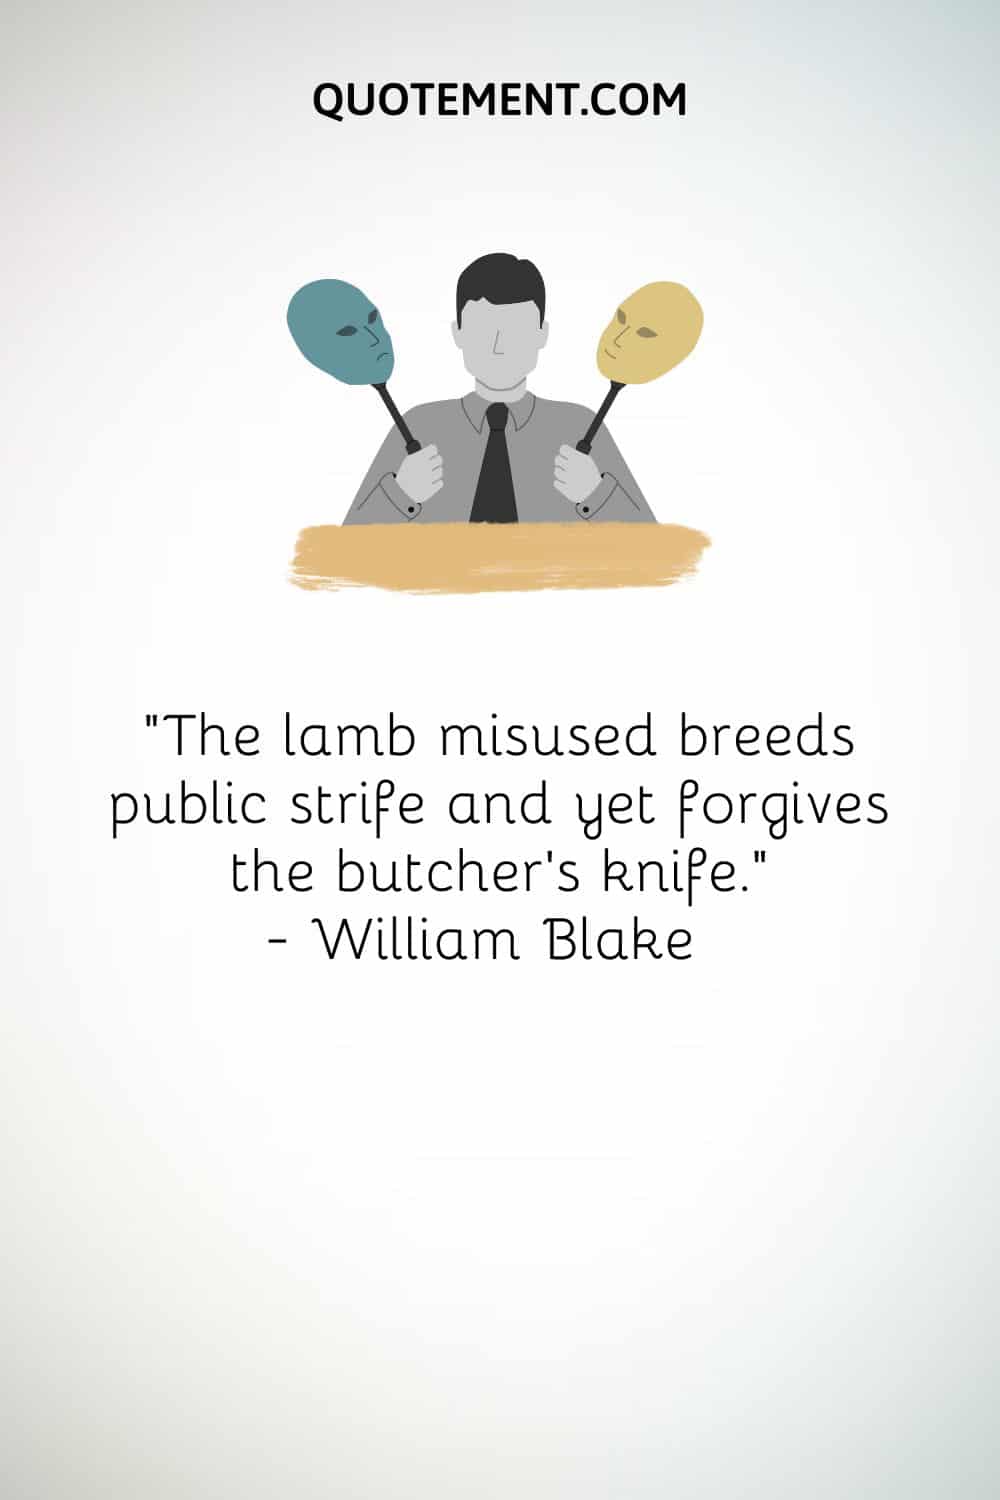 “The lamb misused breeds public strife and yet forgives the butcher’s knife.” — William Blake